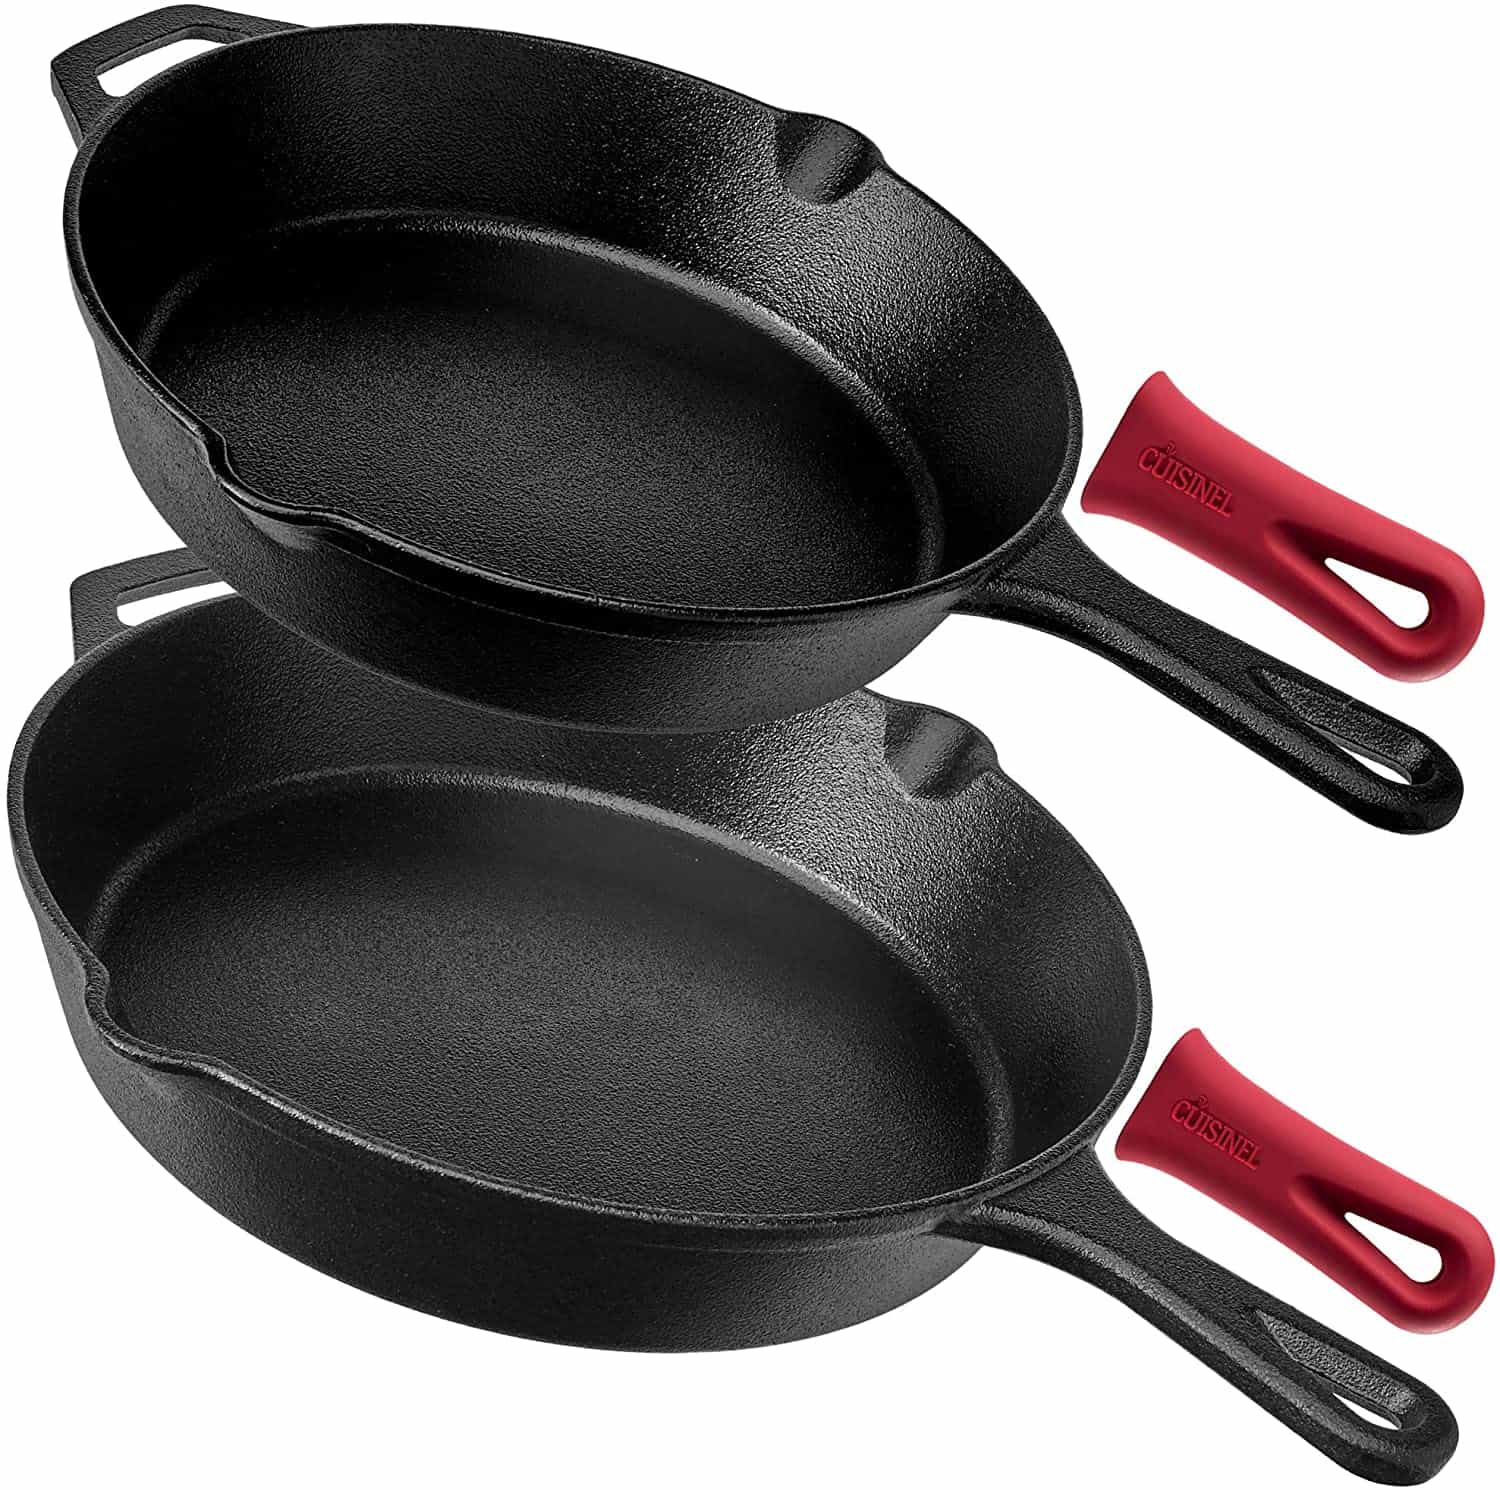 Pre-Seasoned Cast Iron Skillet 2-Piece Set (10-Inch and 12-Inch) Oven Safe Cookware | 2 Heat-Resistant Holders | Indoor and Outdoor Use | Grill, Stovetop, Induction Safe